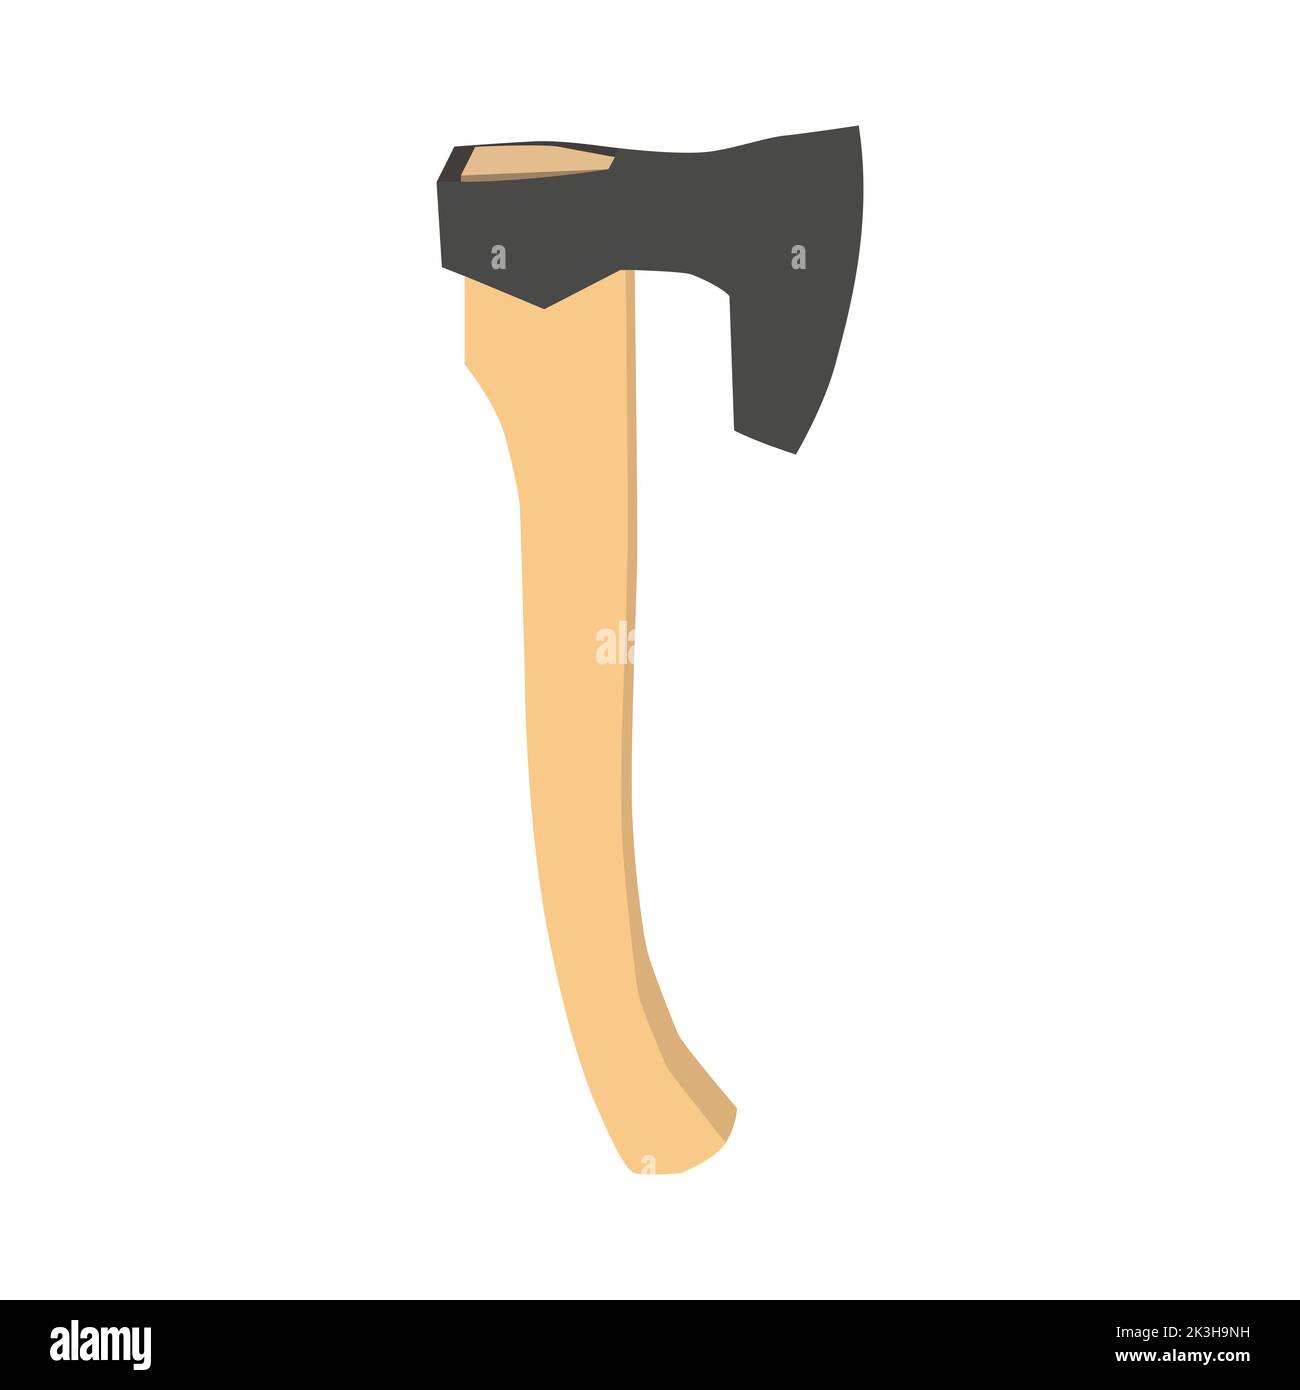 https://c8.alamy.com/comp/2K3H9NH/wooden-axe-isolated-on-white-background-metal-axe-with-a-handle-made-of-wood-2K3H9NH.jpg